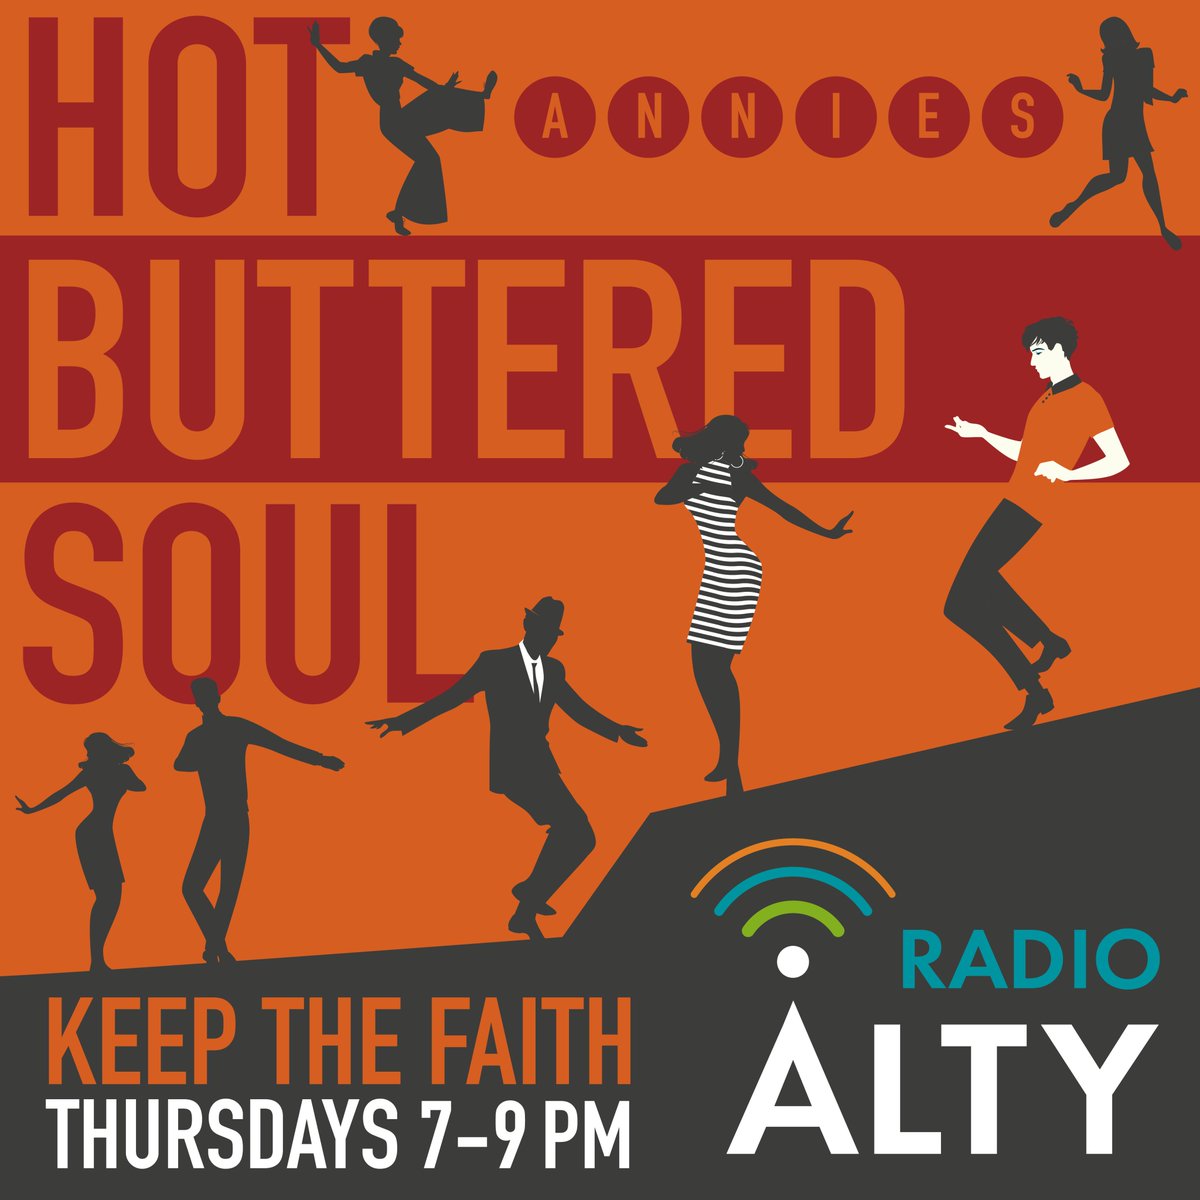 After you've been to the ballot box (where applicable), vote #HotButteredSoul from 7pm. The candidates for your listening pleasure include Johnnie Taylor, The Majestic, Lynn Vernado, Jr Walker & the All Stars, Johnny de Vigne, The Artistics, Marie Knight, The 4 Tops & many more!